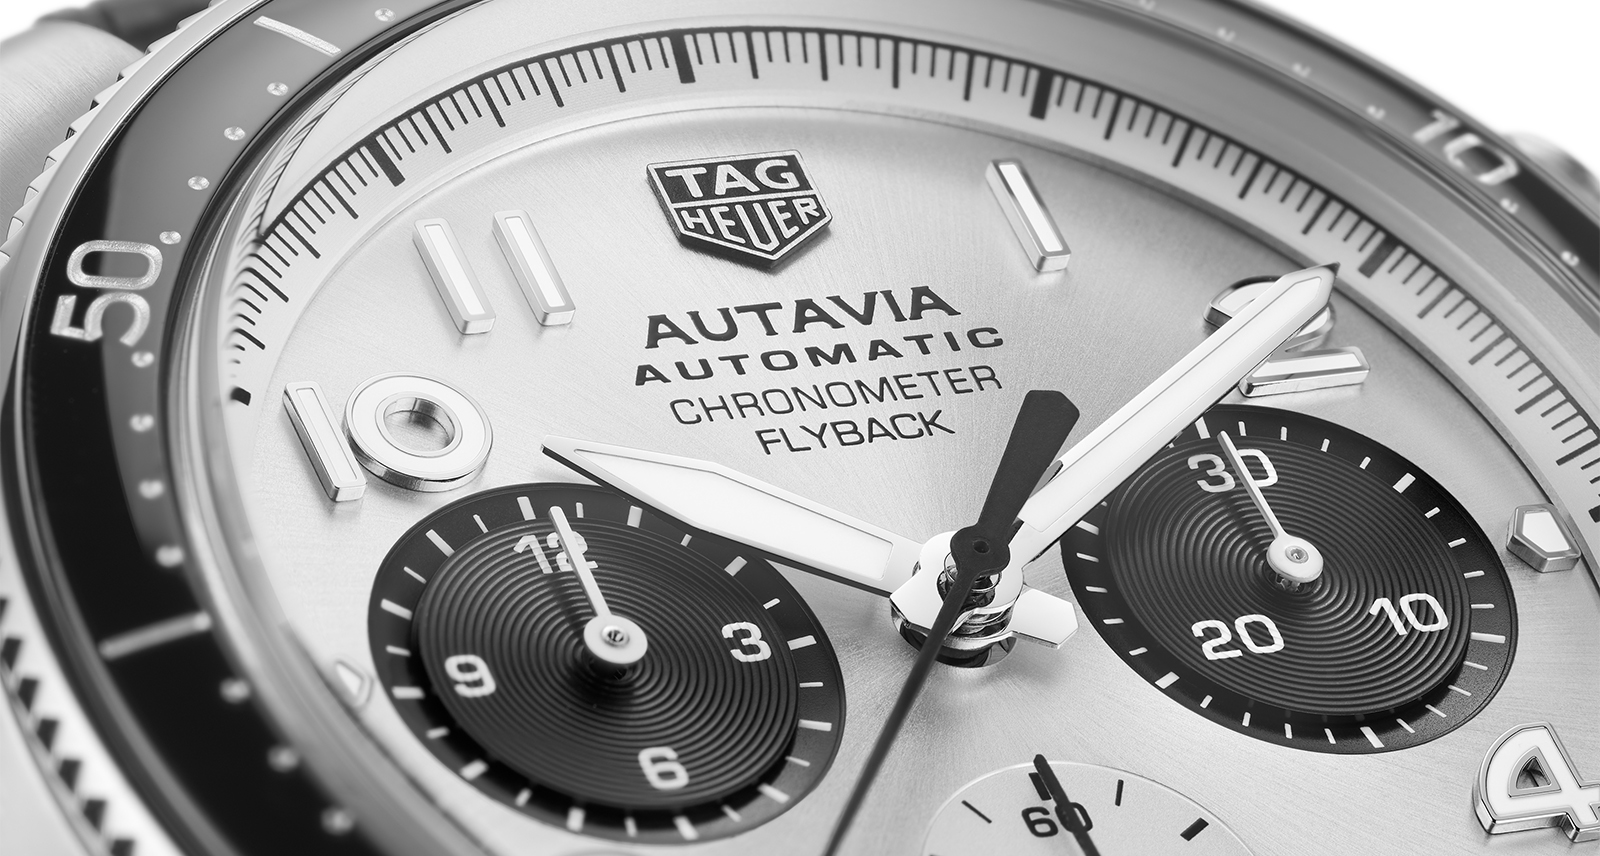 Third LVMH Watch Week Includes Tag Heuer, Gears Up for Watches